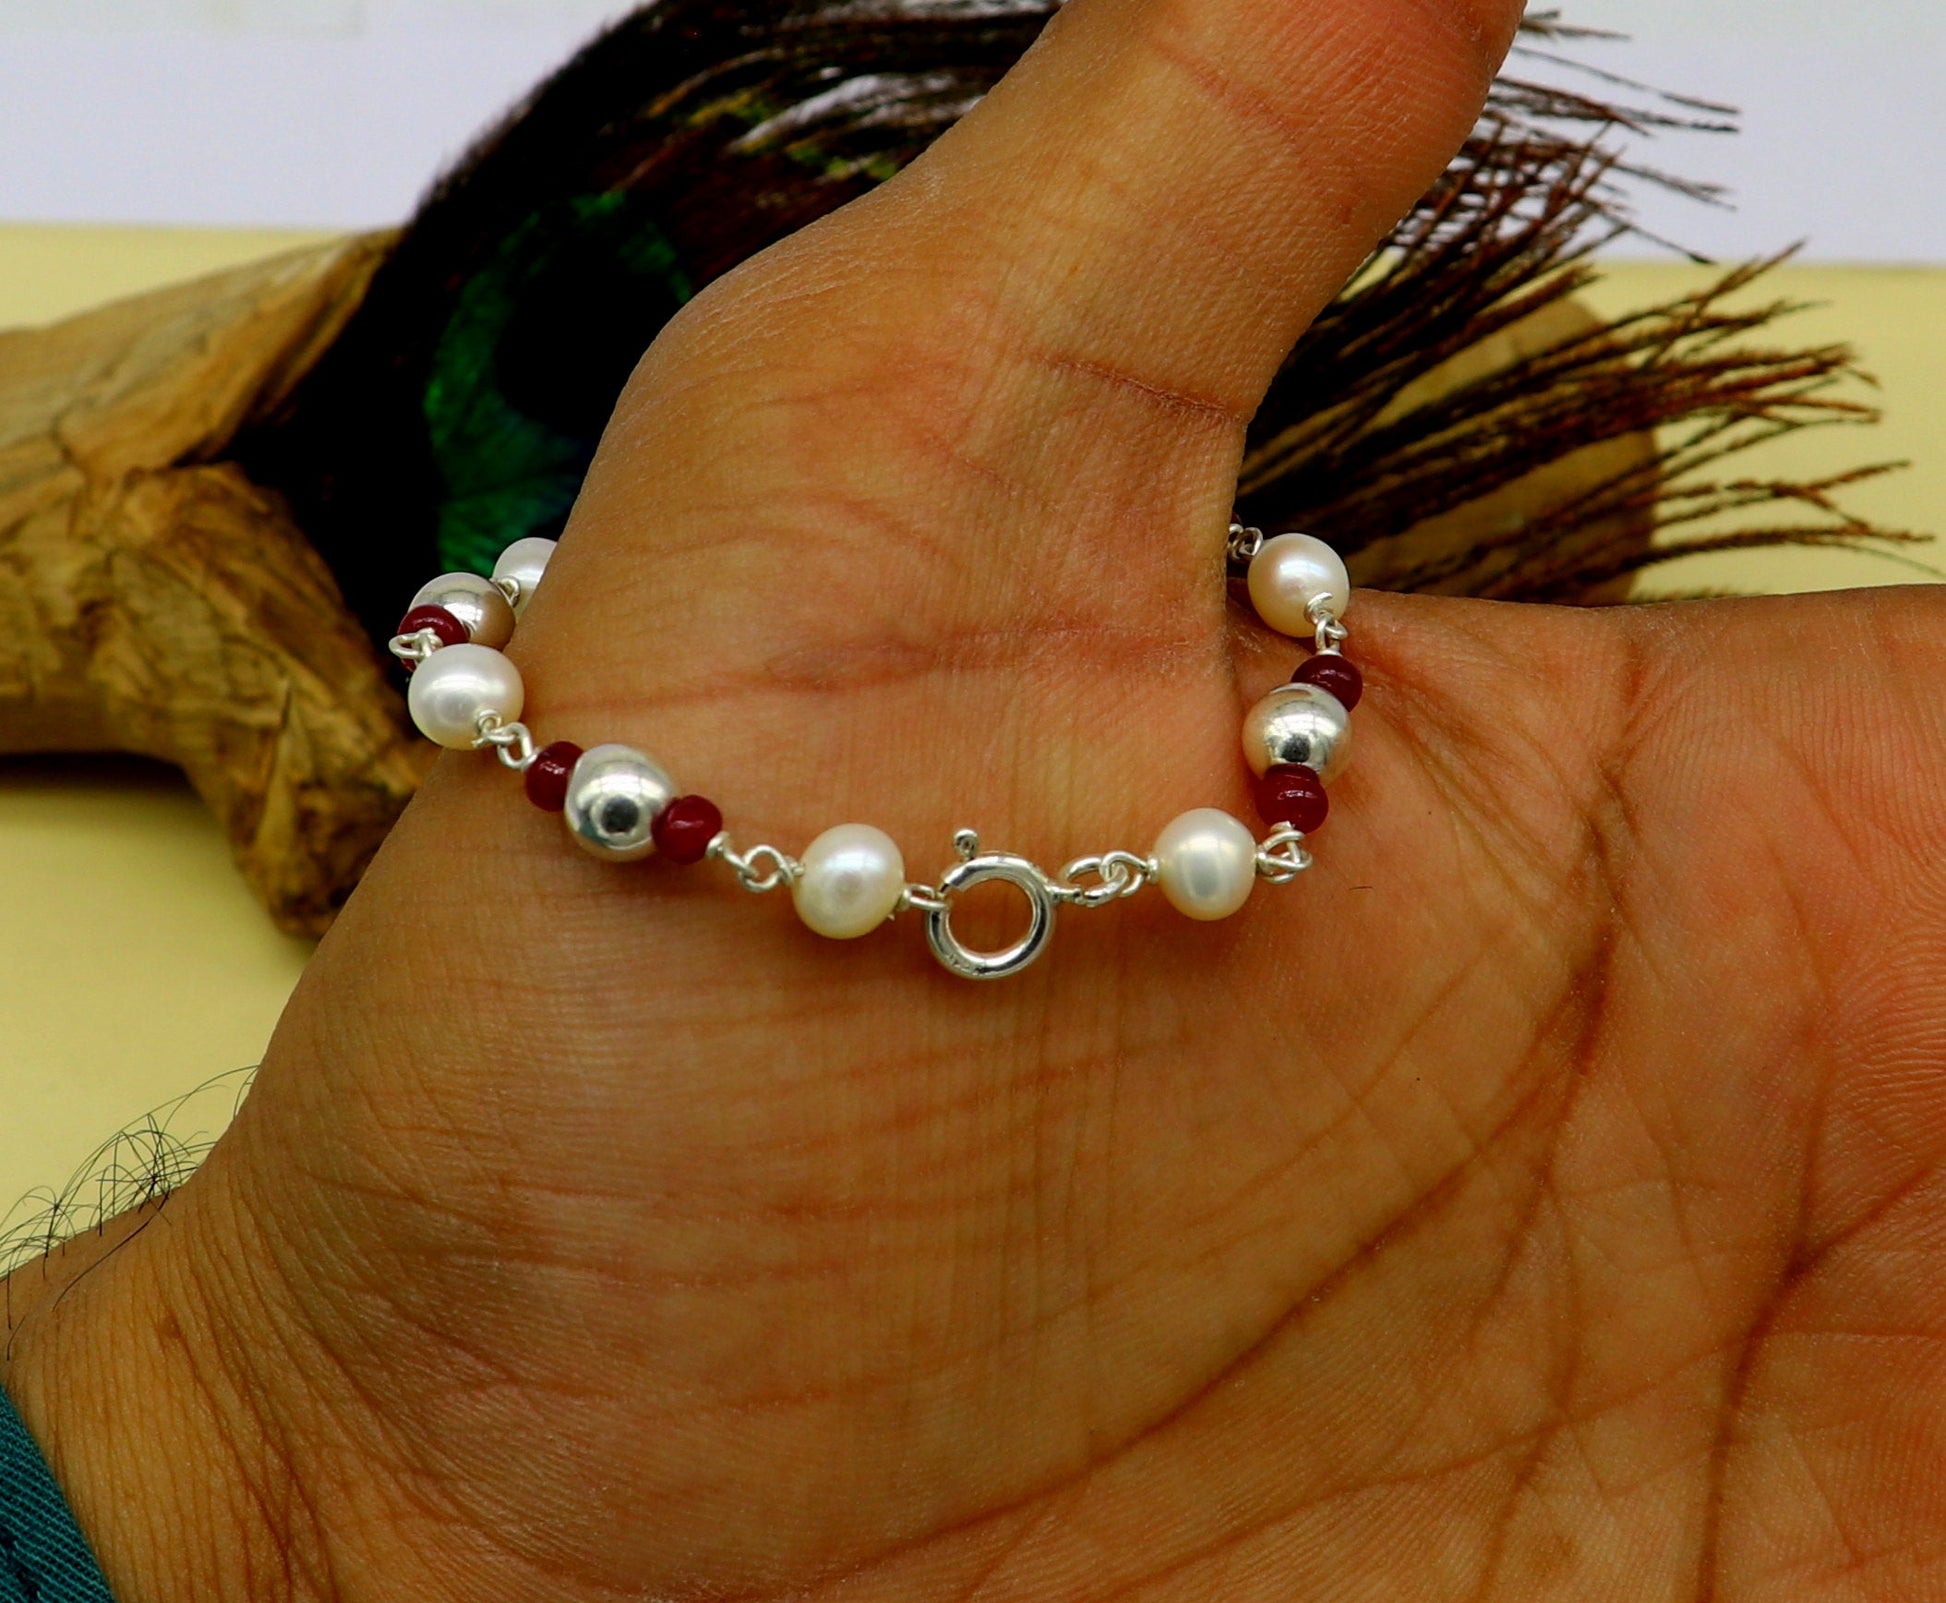 5mm silver and pearl beaded 925 sterling silver handmade customized baby bracelet, fabulous gifting kids jewelry, new born baby jewelry bbr4 - TRIBAL ORNAMENTS